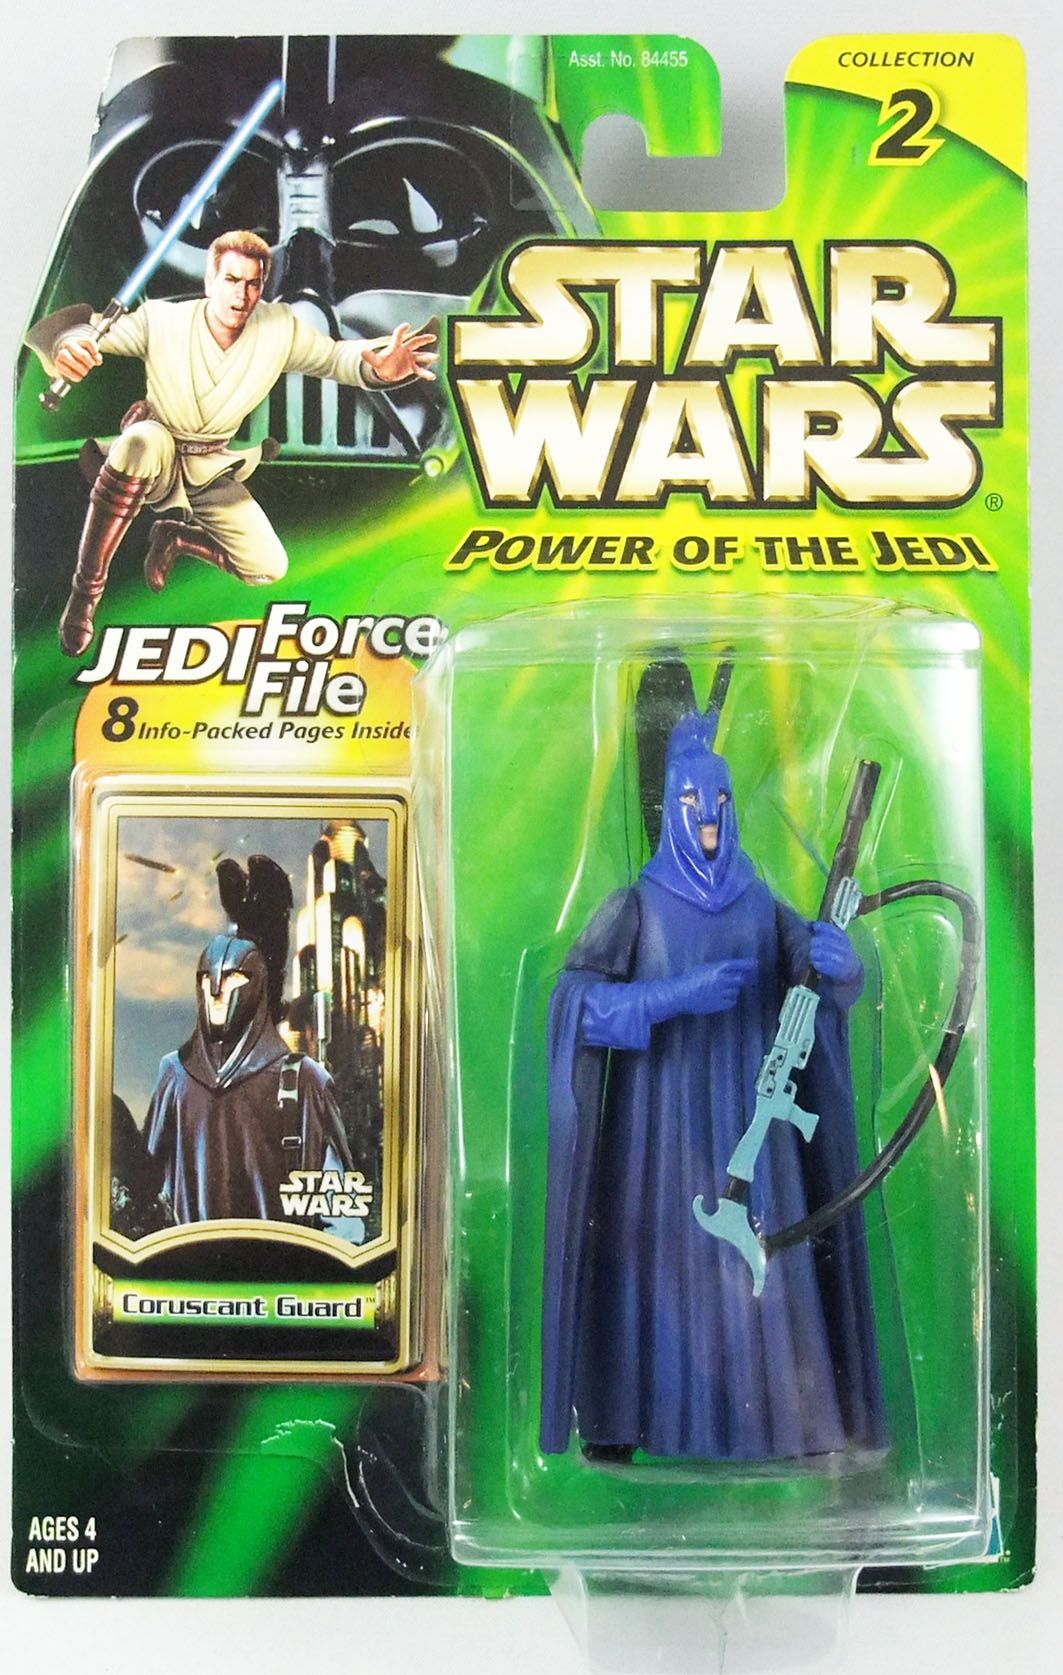 Jedi Force File Mint Coruscant Guard PR Action Figure for sale online Power of the Jedi Hasbro Star Wars Collection 2 Collectible 